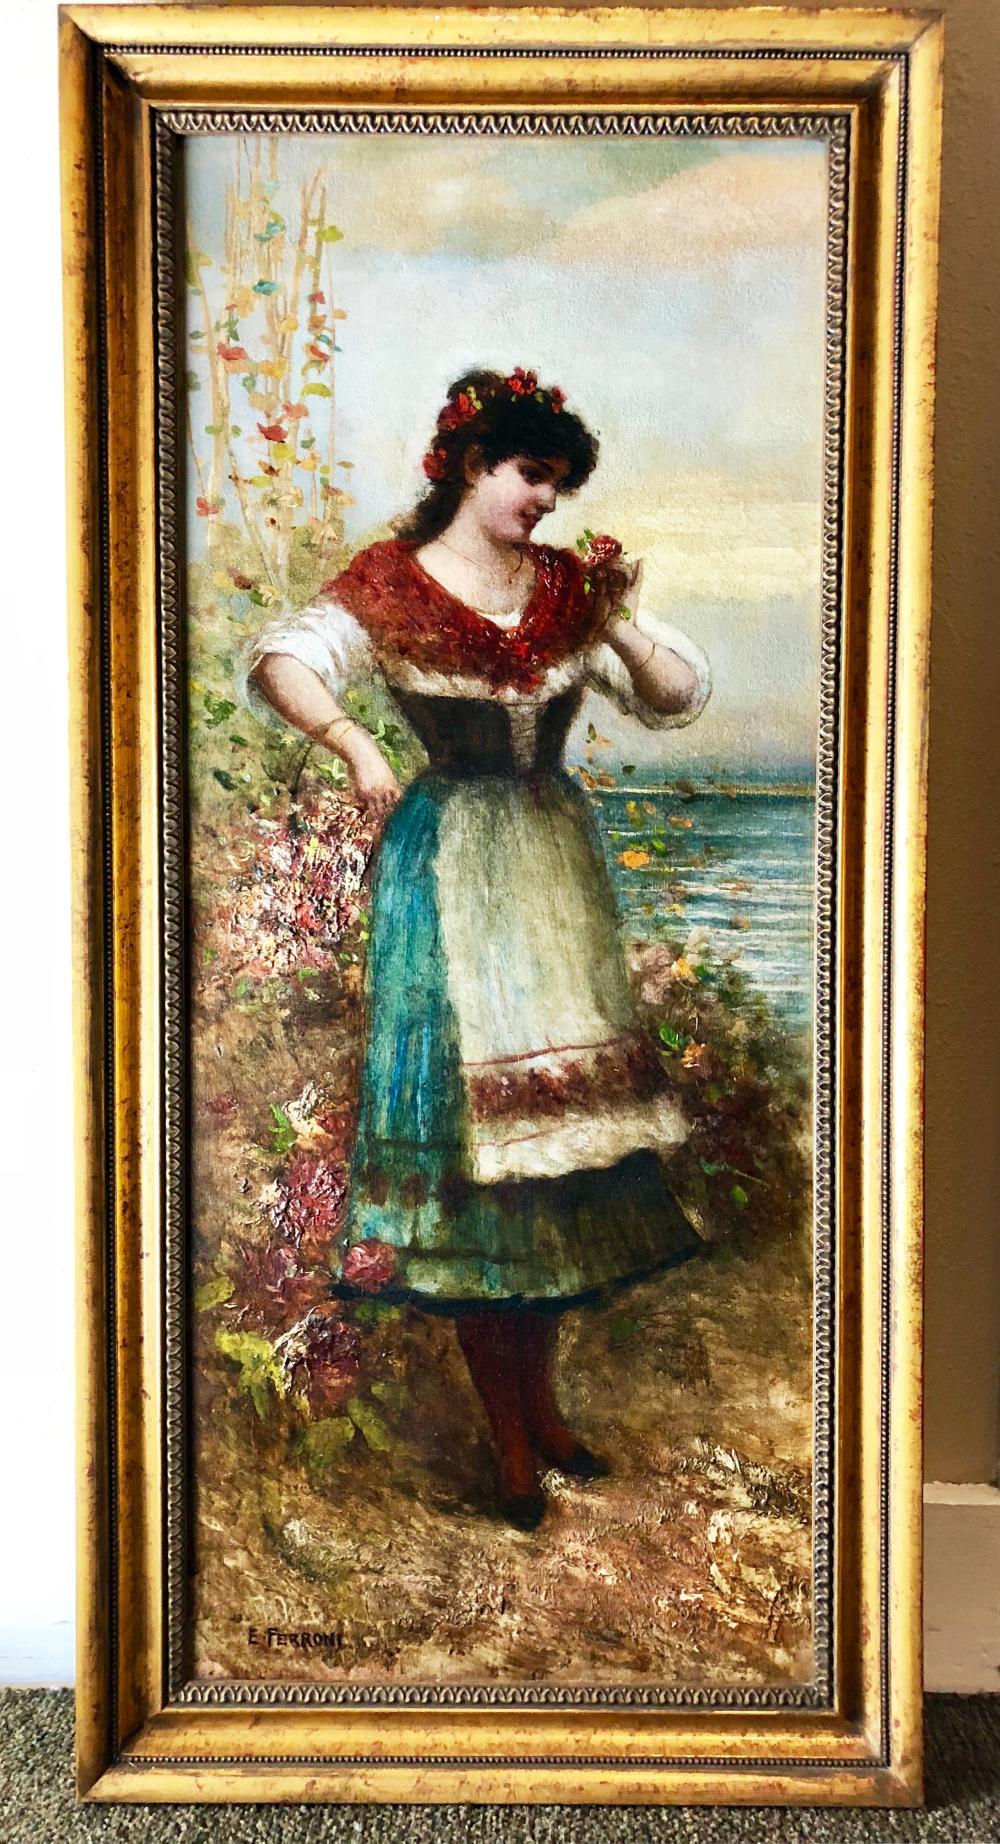 A 19th Century antique portrait oil painting by acclaimed and well listed Italian artist Egisto Ferroni (1835-1912)  Entitled "Women with a Basket"  Oil on Canvas  Housed in a newer gold gilded wood frame  Measures 32.5" H x 13.5" W  In very good